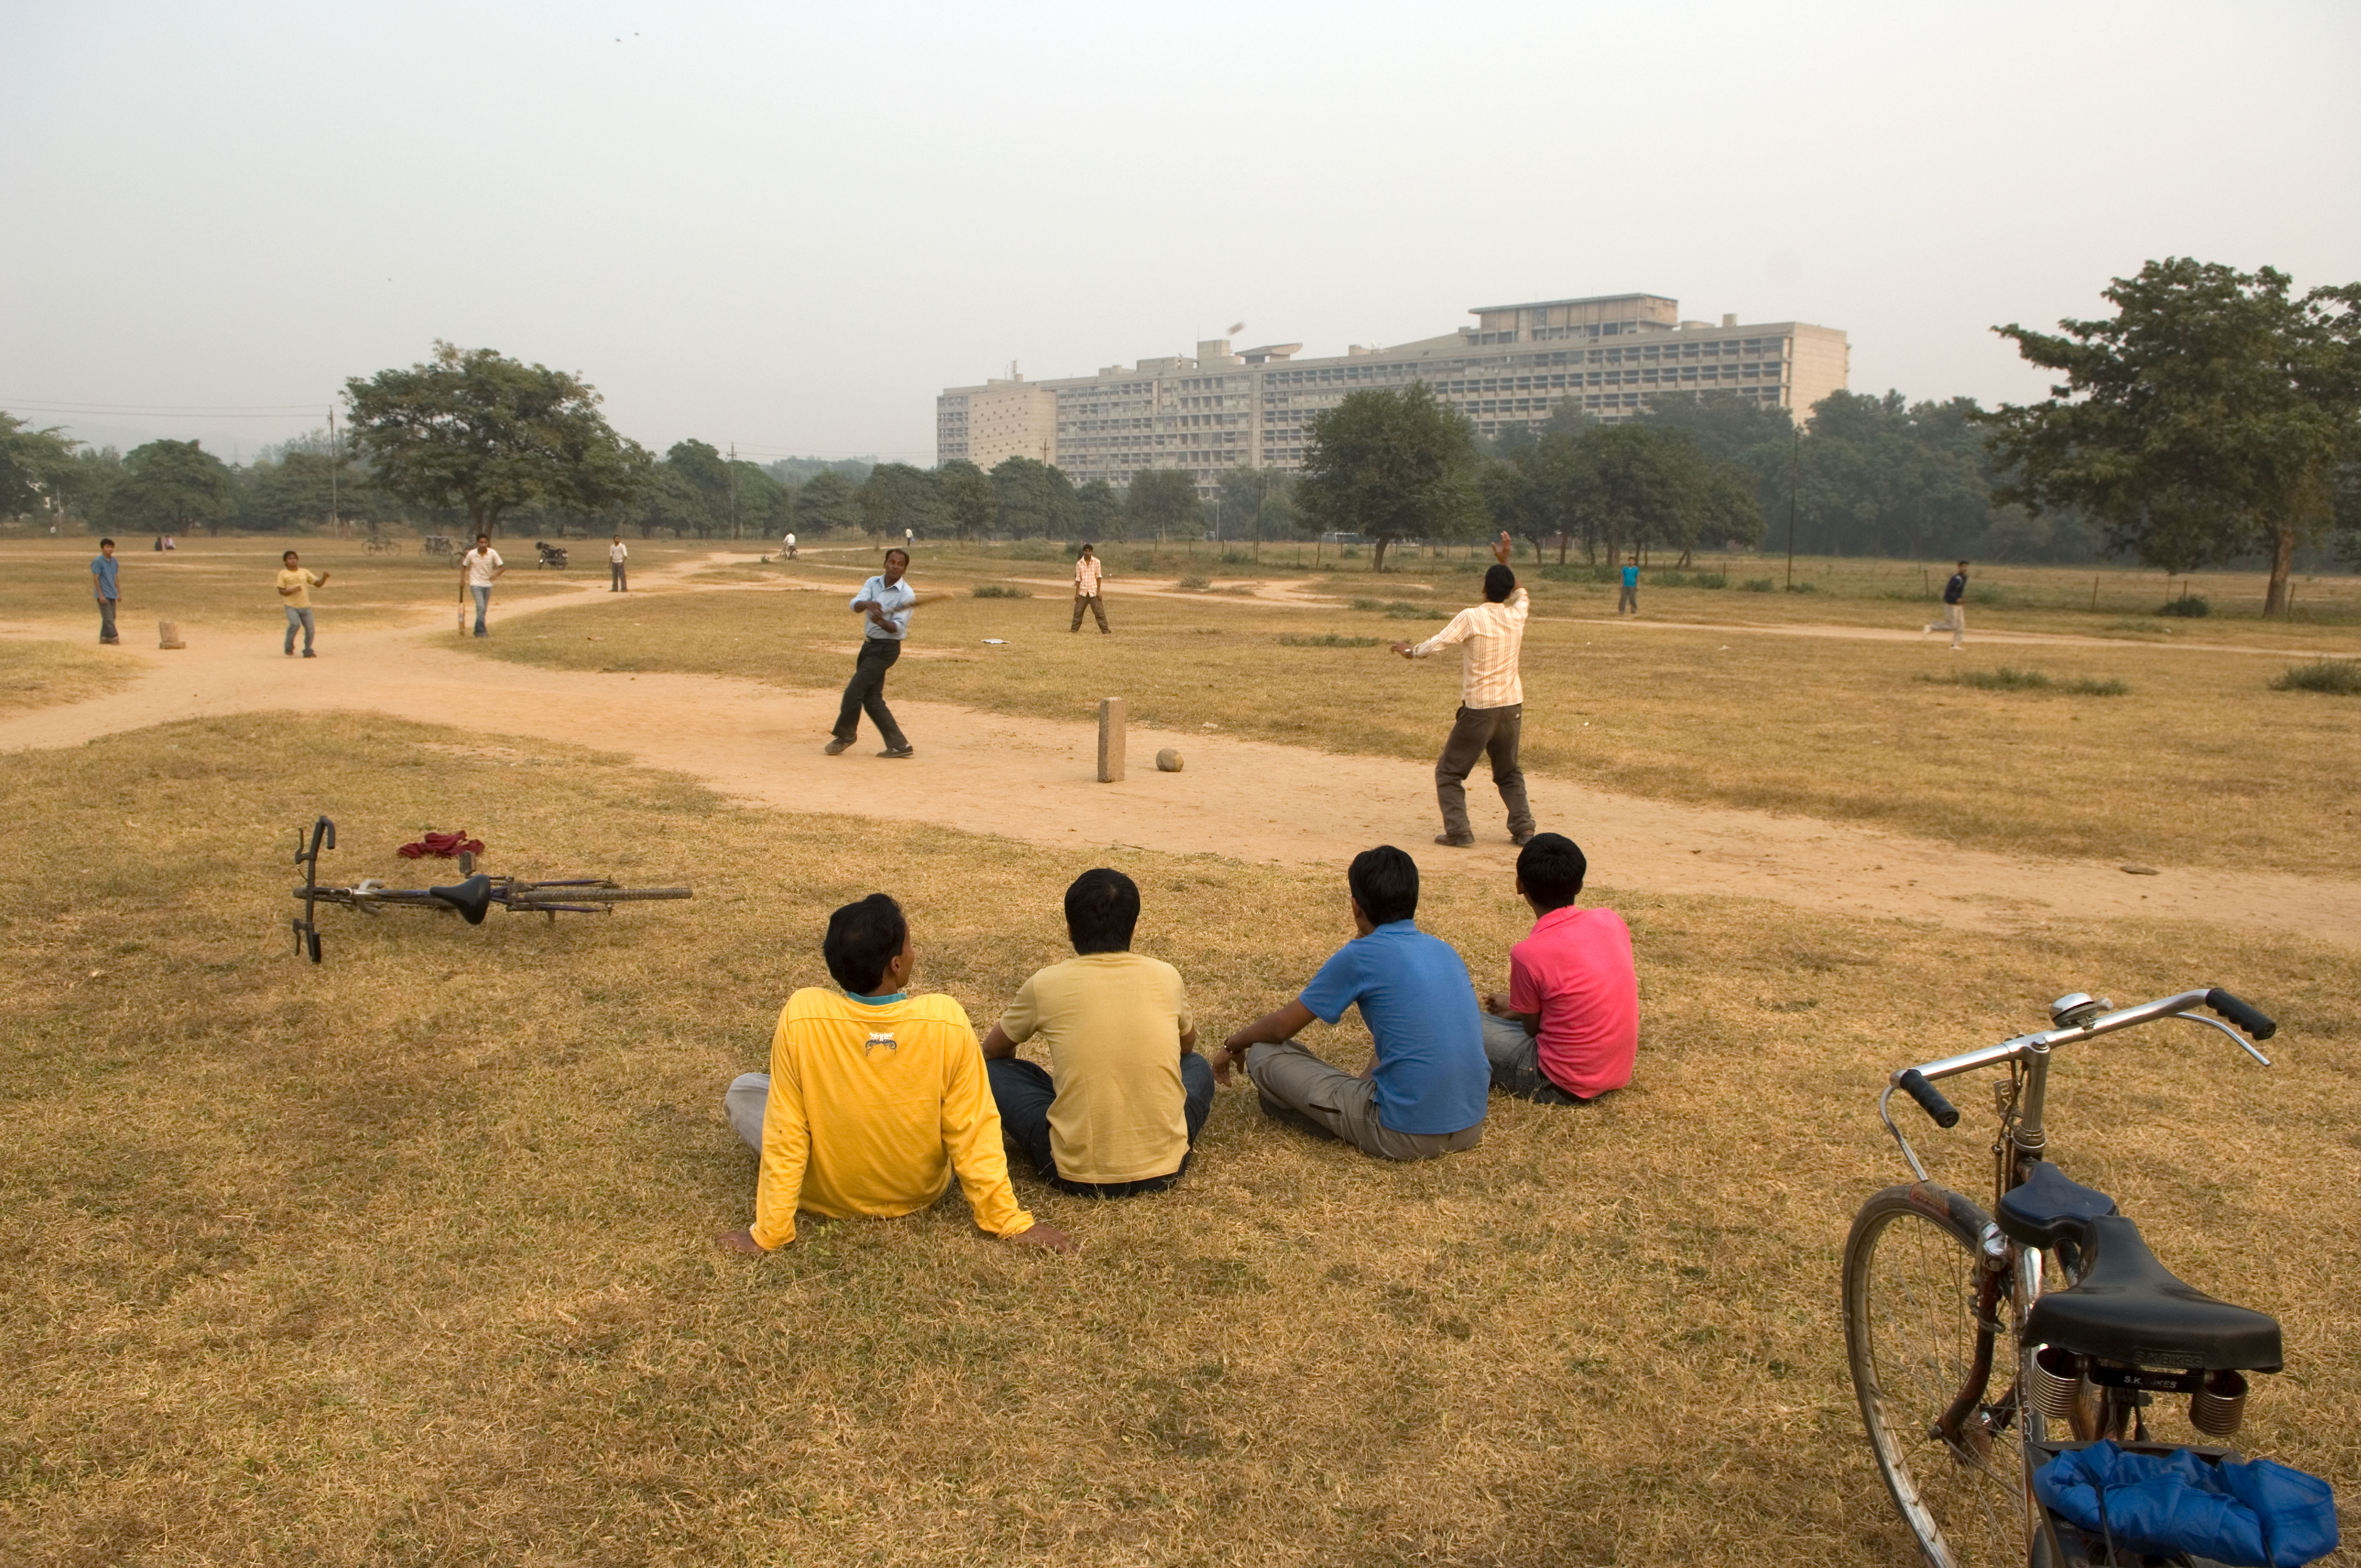 Cricket played in front of Le Corbusier's Capital Complex, Chandigarh, Punjab, India